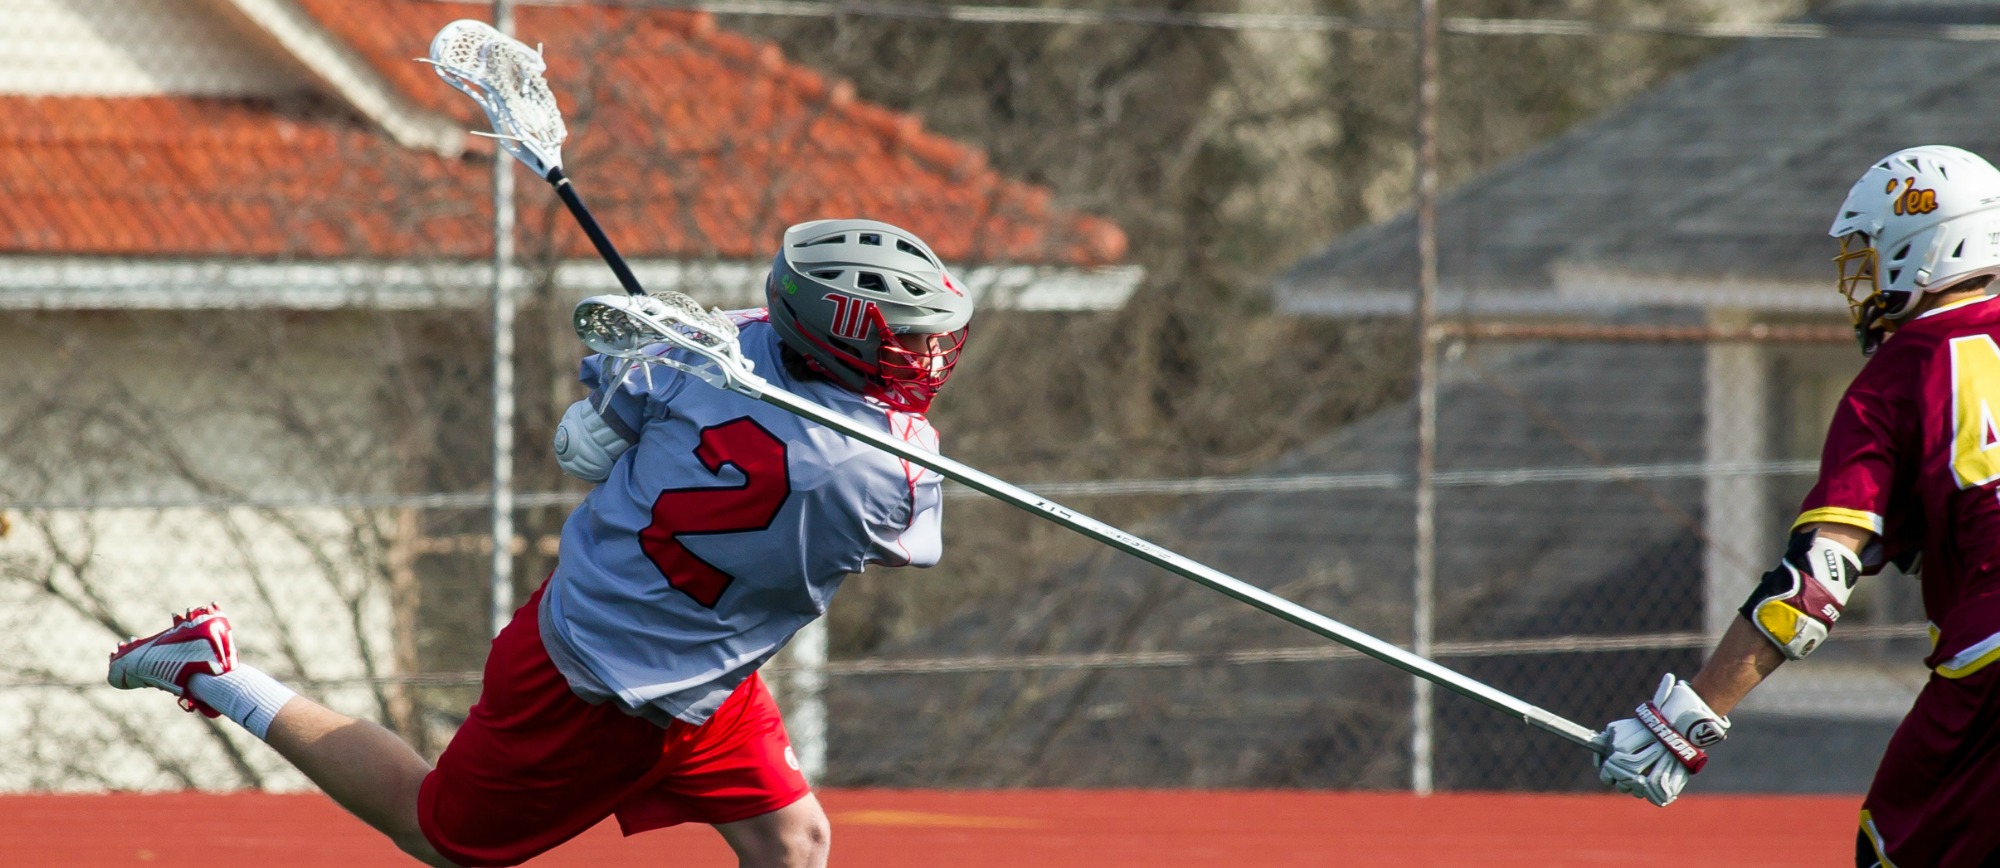 Men's Lacrosse Improves to 2-0 in NCAC Play with 12-8 Win over Oberlin